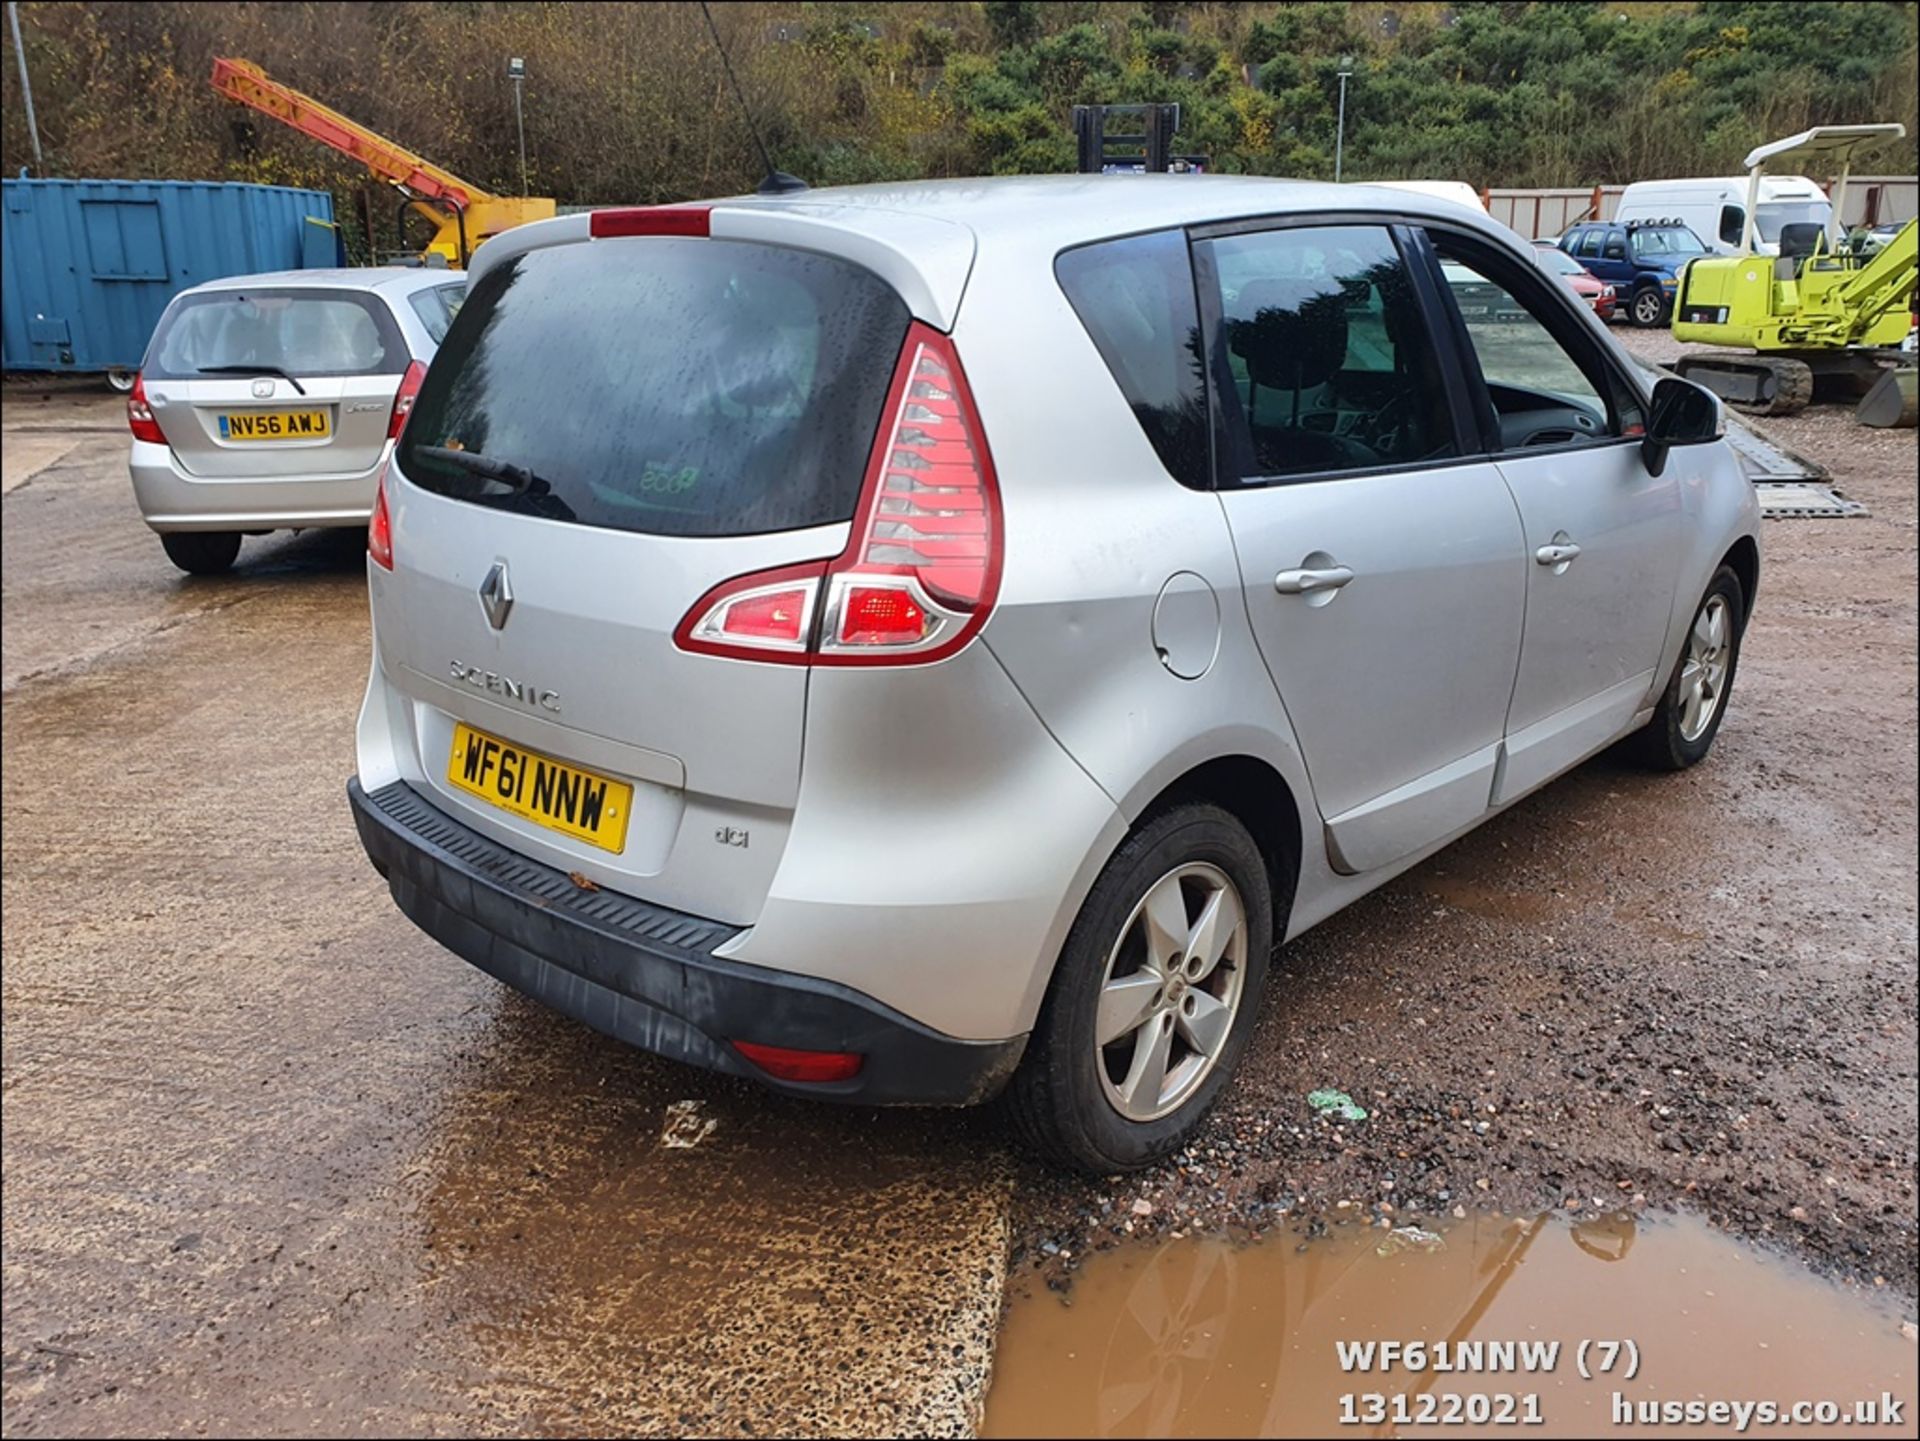 11/61 RENAULT SCENIC DYNAMIQUE TOMTOM D - 1461cc 5dr MPV (Silver, 93k) - Image 8 of 37